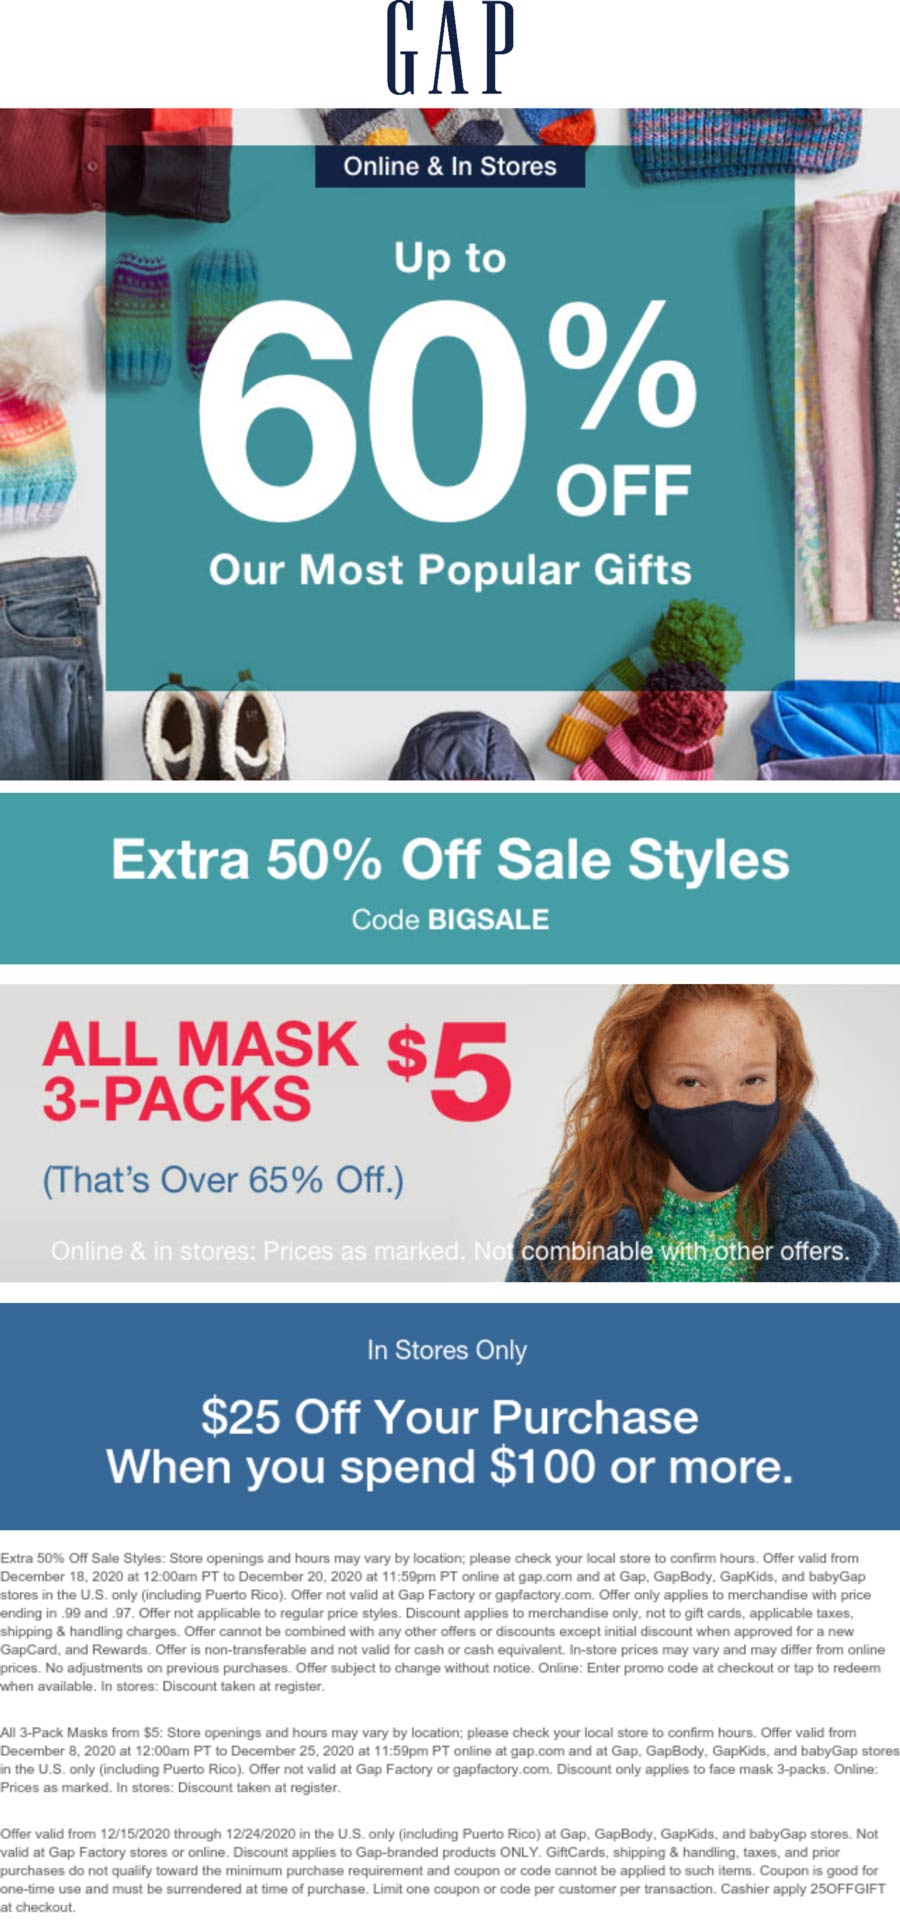 Gap stores Coupon  $25 off $100 today at Gap, or extra 50% off sale items online via promo code BIGSALE #gap 